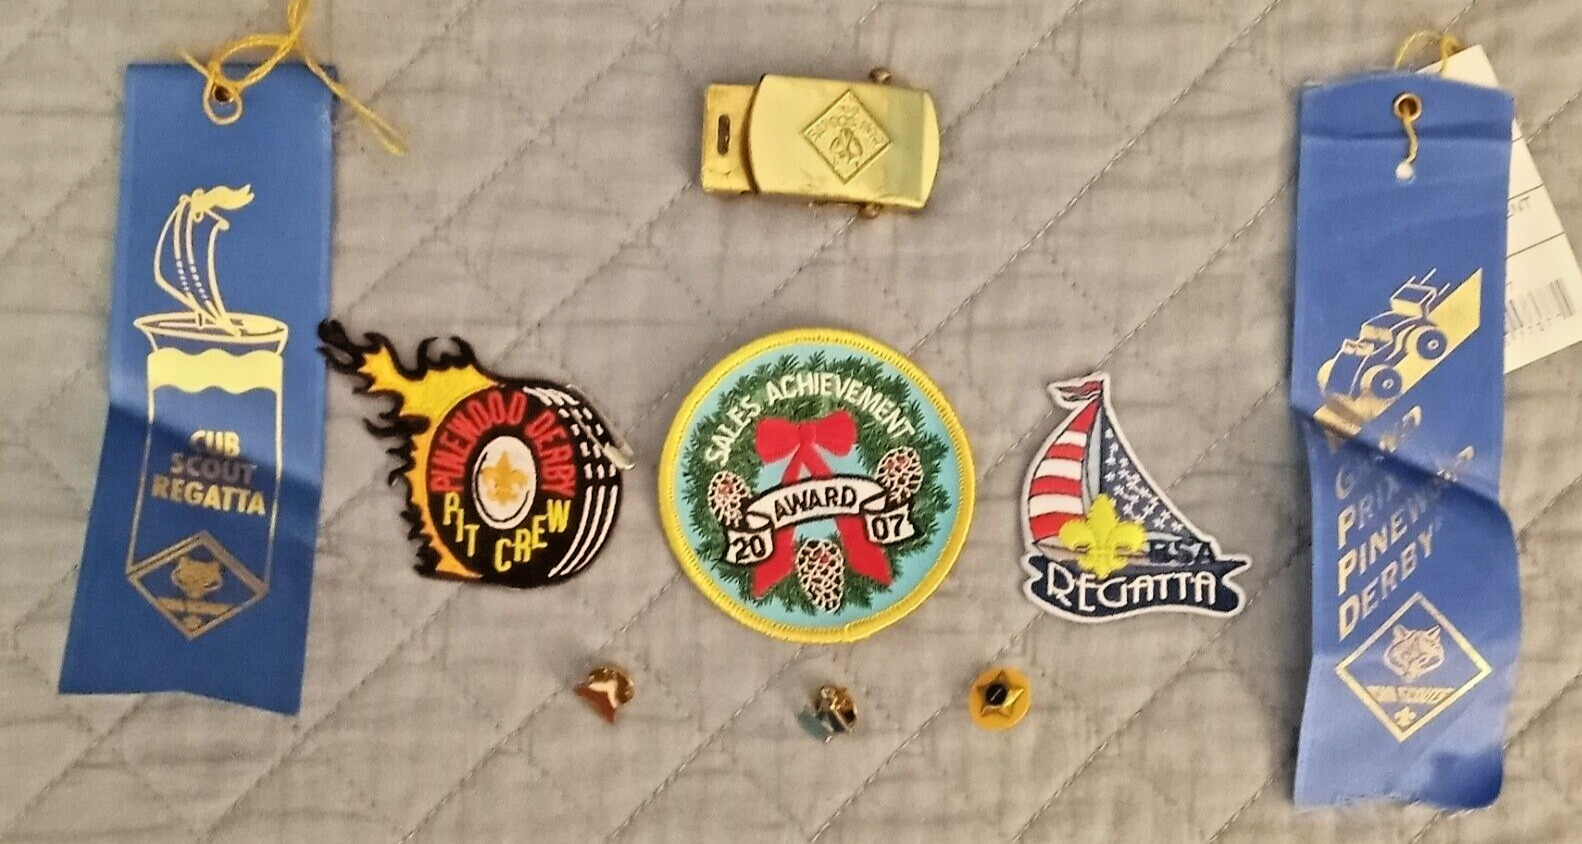 Lot of 9 Cub Scout Ribbons Pins Patches Wolf Belt Buckle-Pinewood Derby, Regatta